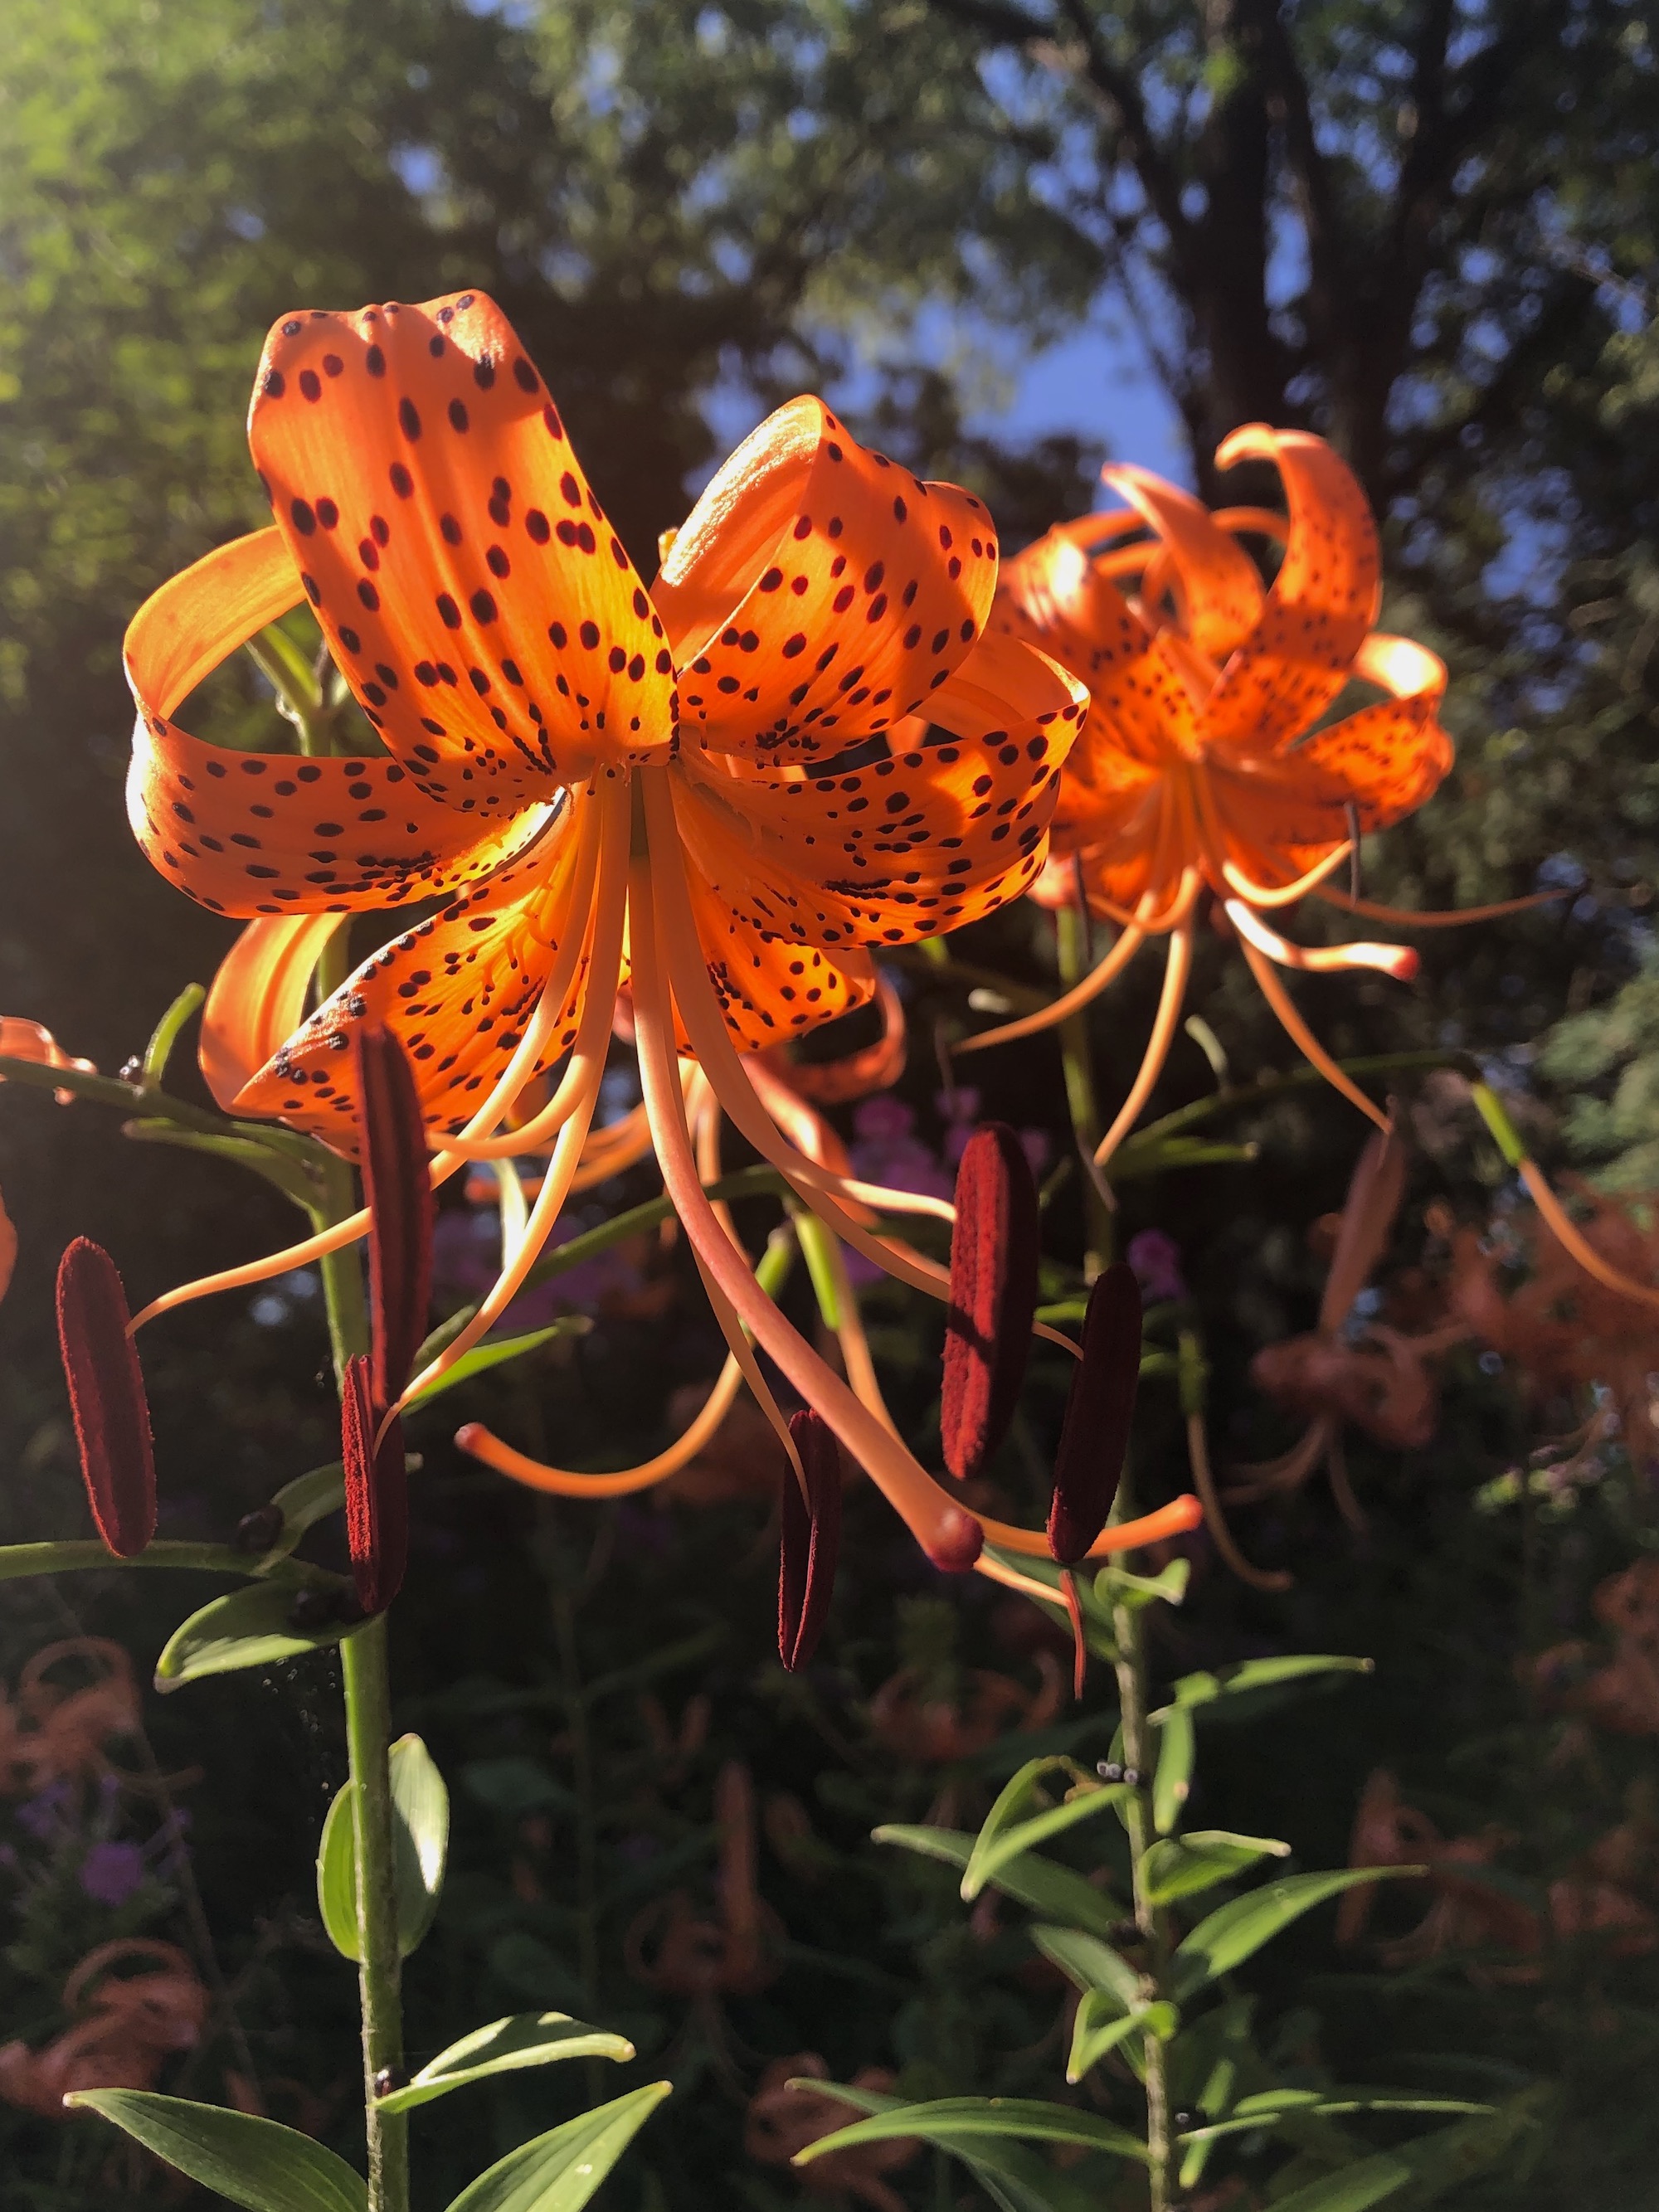 Tiger Lily near the Duck Pond on July 29, 2020.